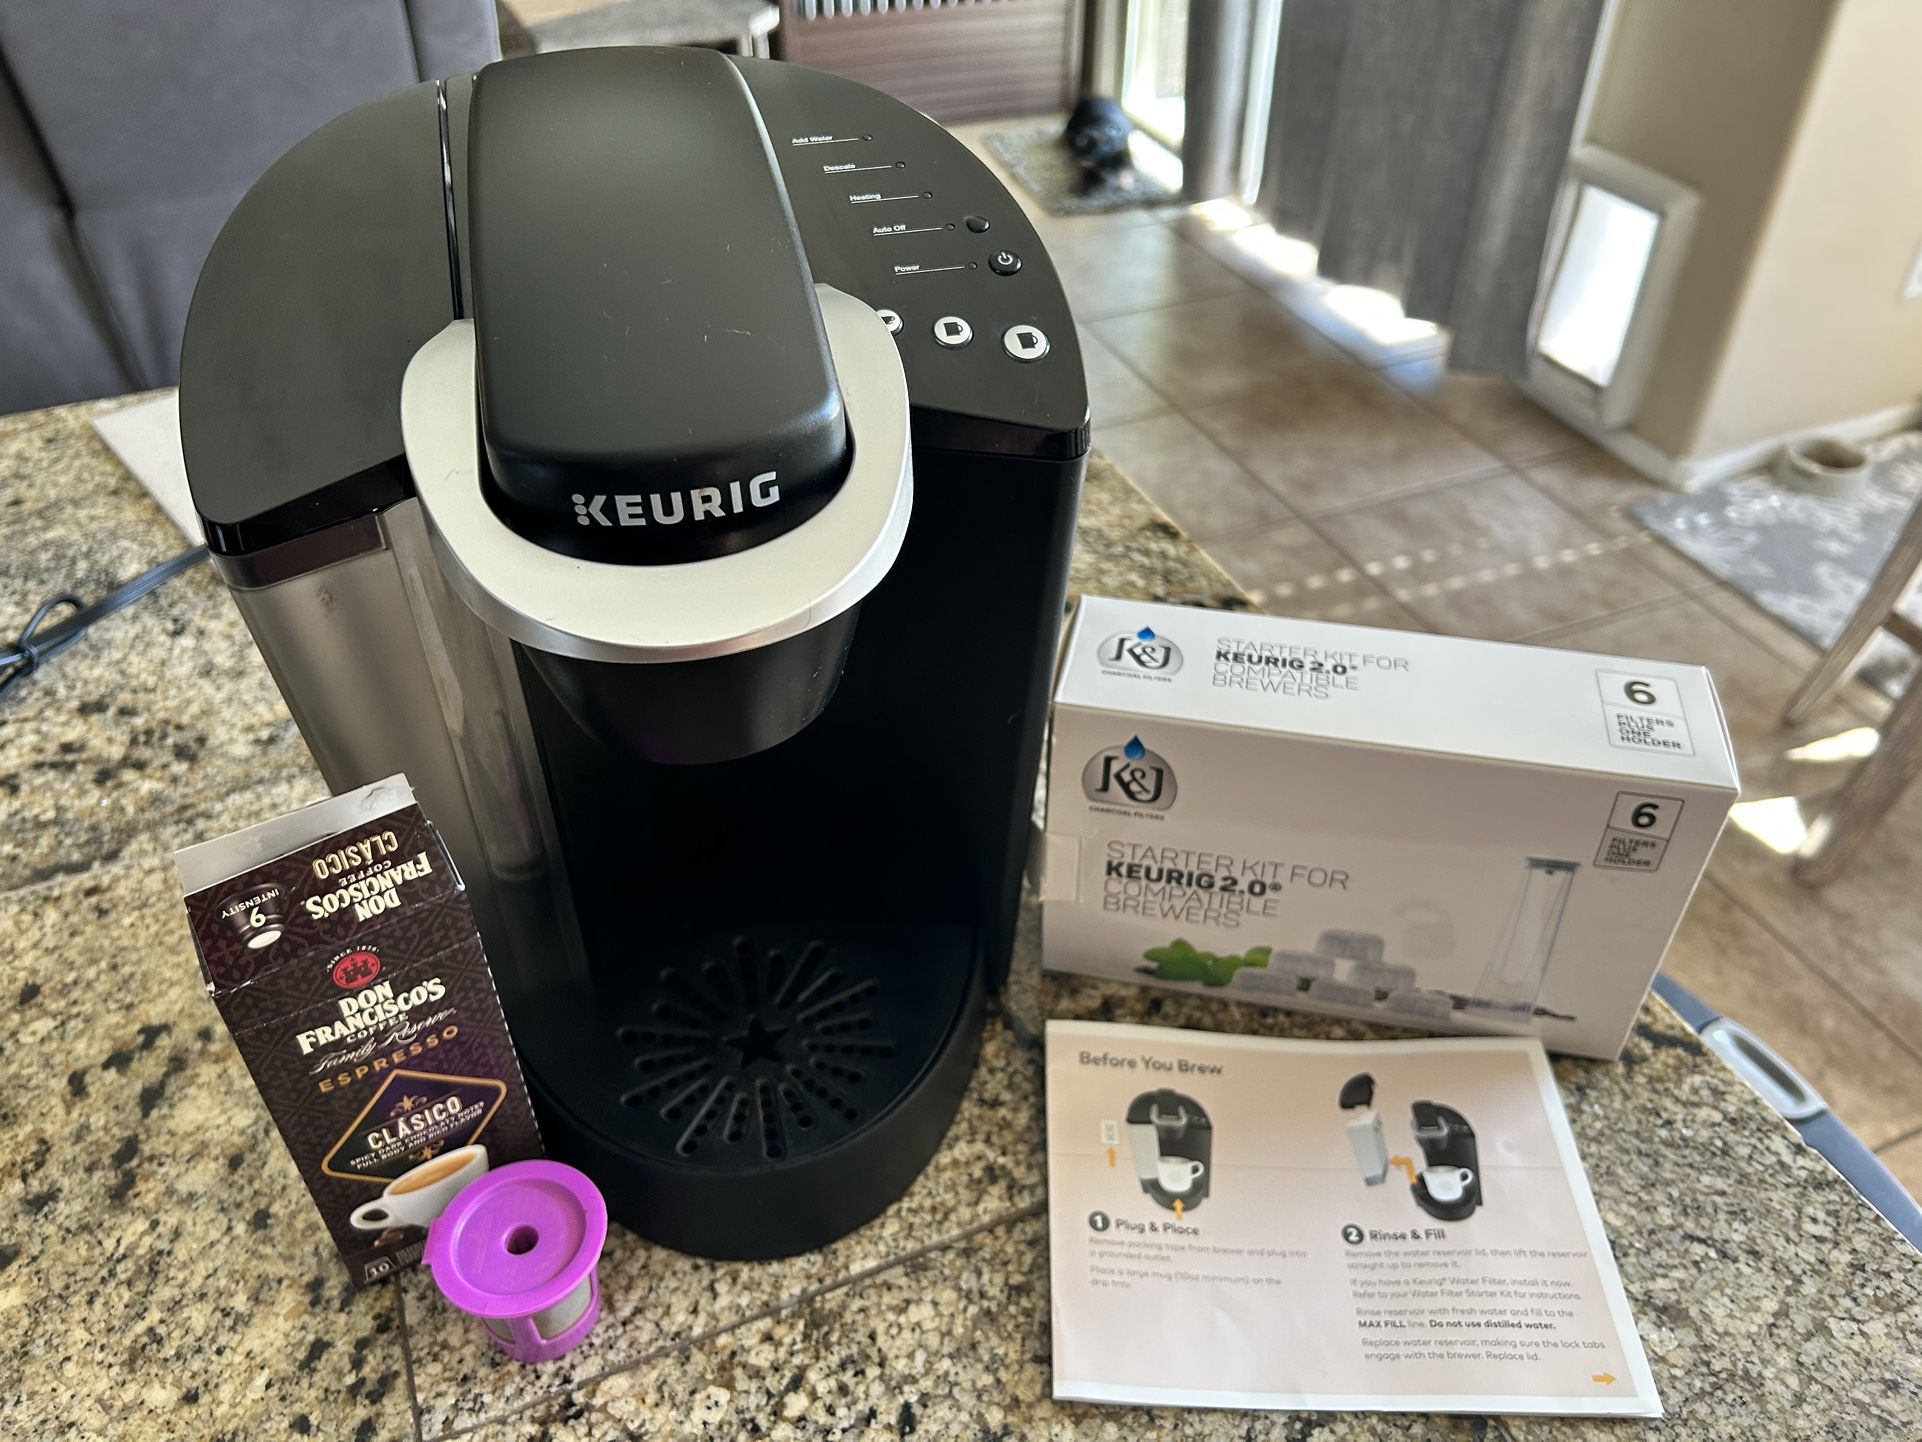 Keurig coffee maker with accessories